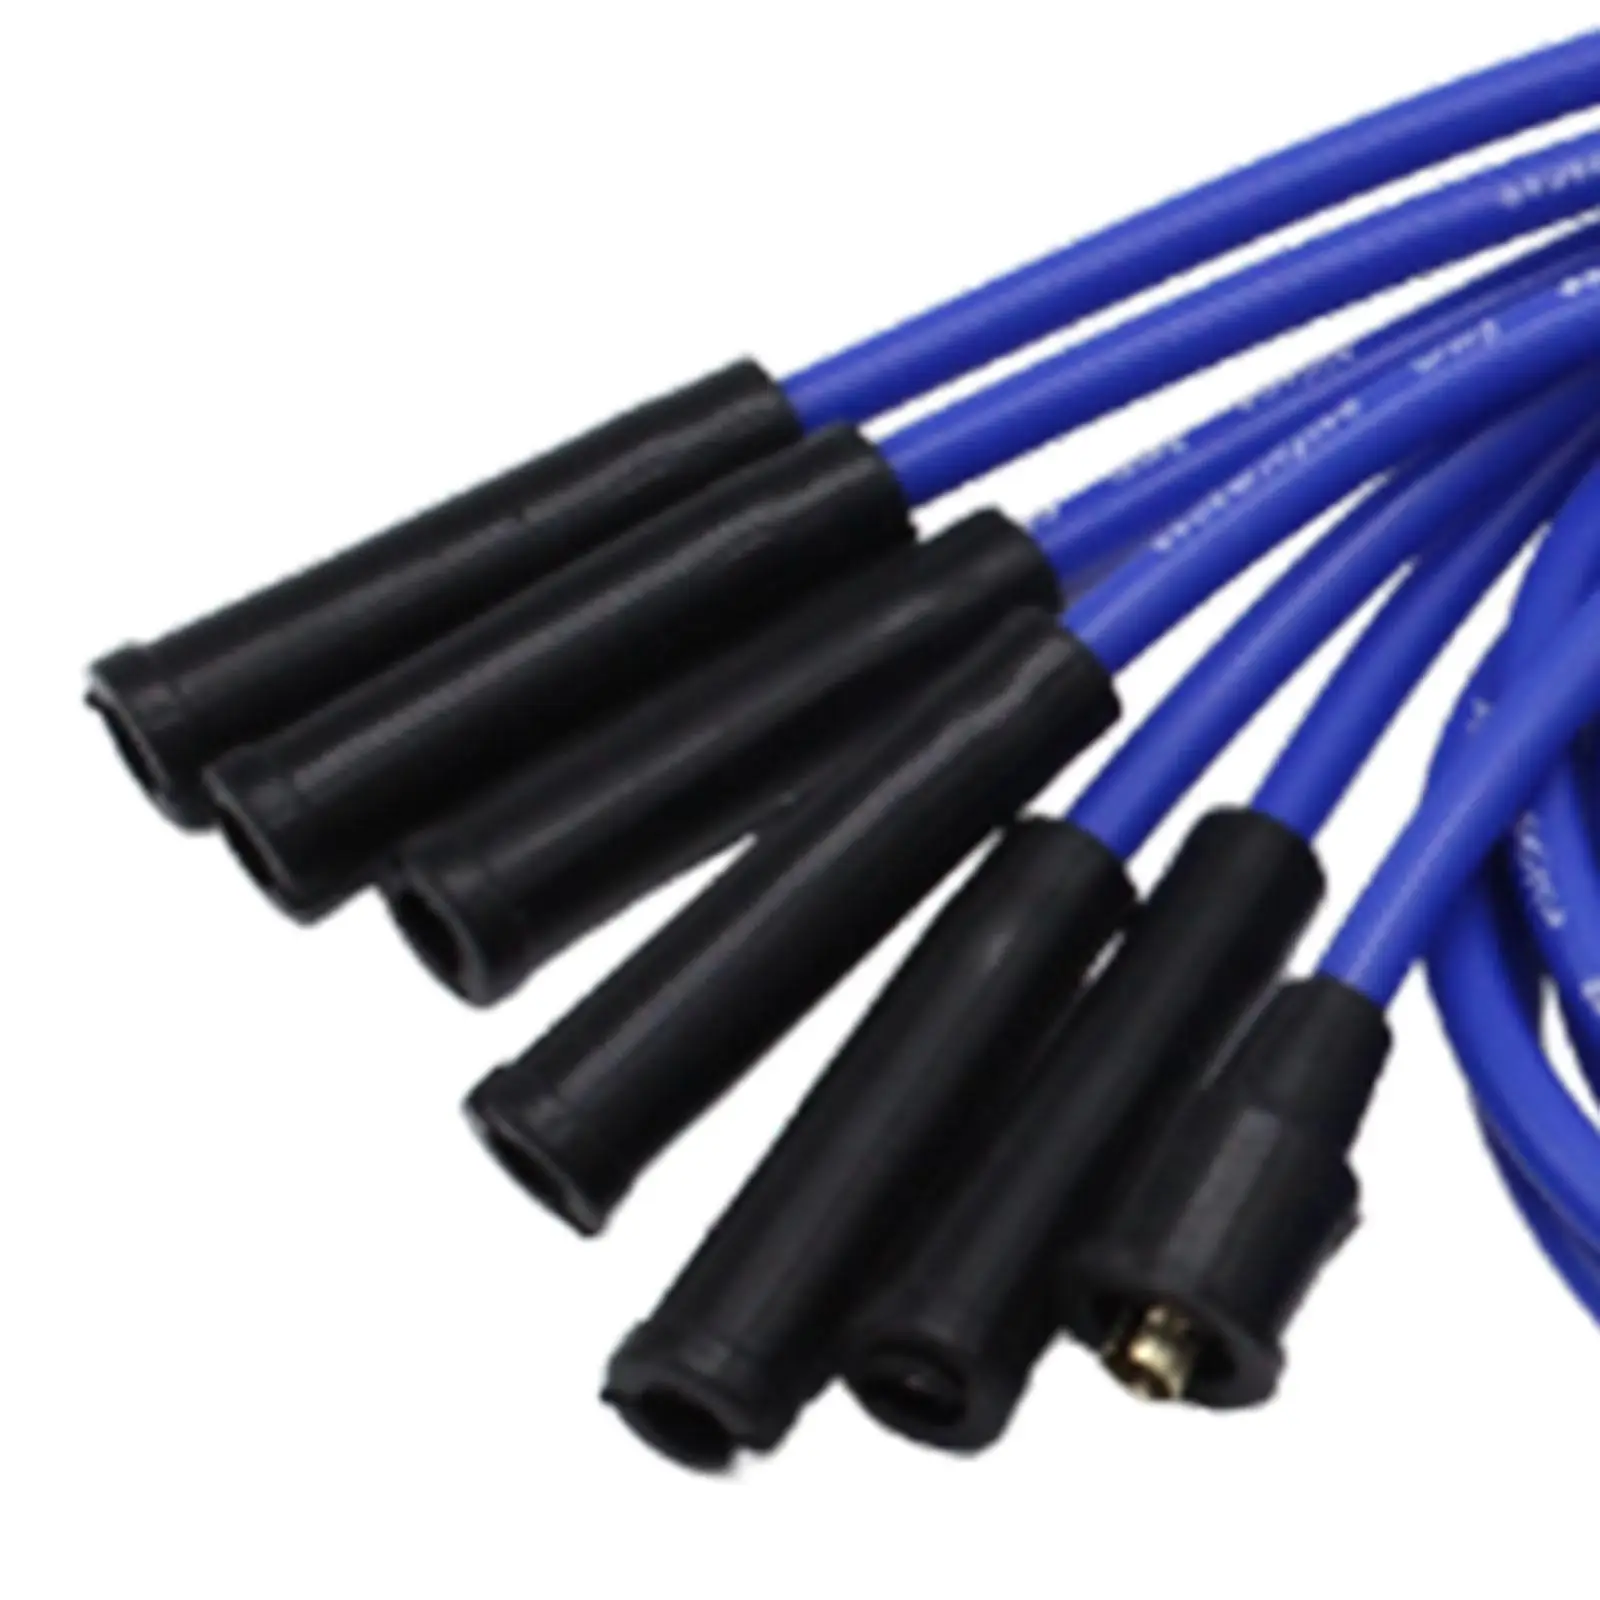 8mm HT Leads 1M Line Length Universal Blue Spark Plug Cables for 6 Cylinder Classic Cars Replacement Durable Ignition Parts